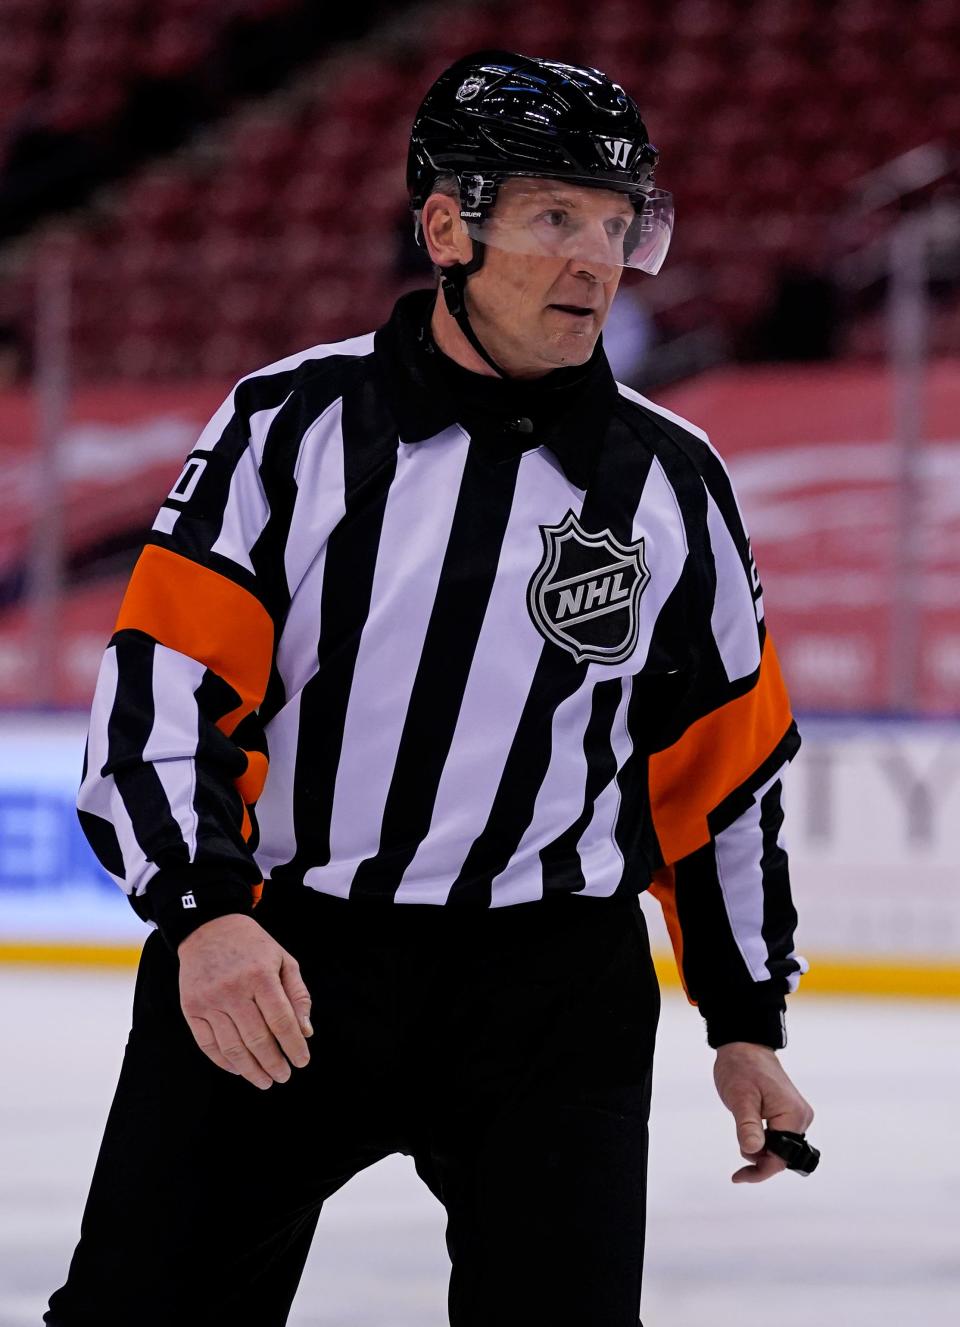 NHL referee Tim Peel will no longer work games after a hot mic incident.